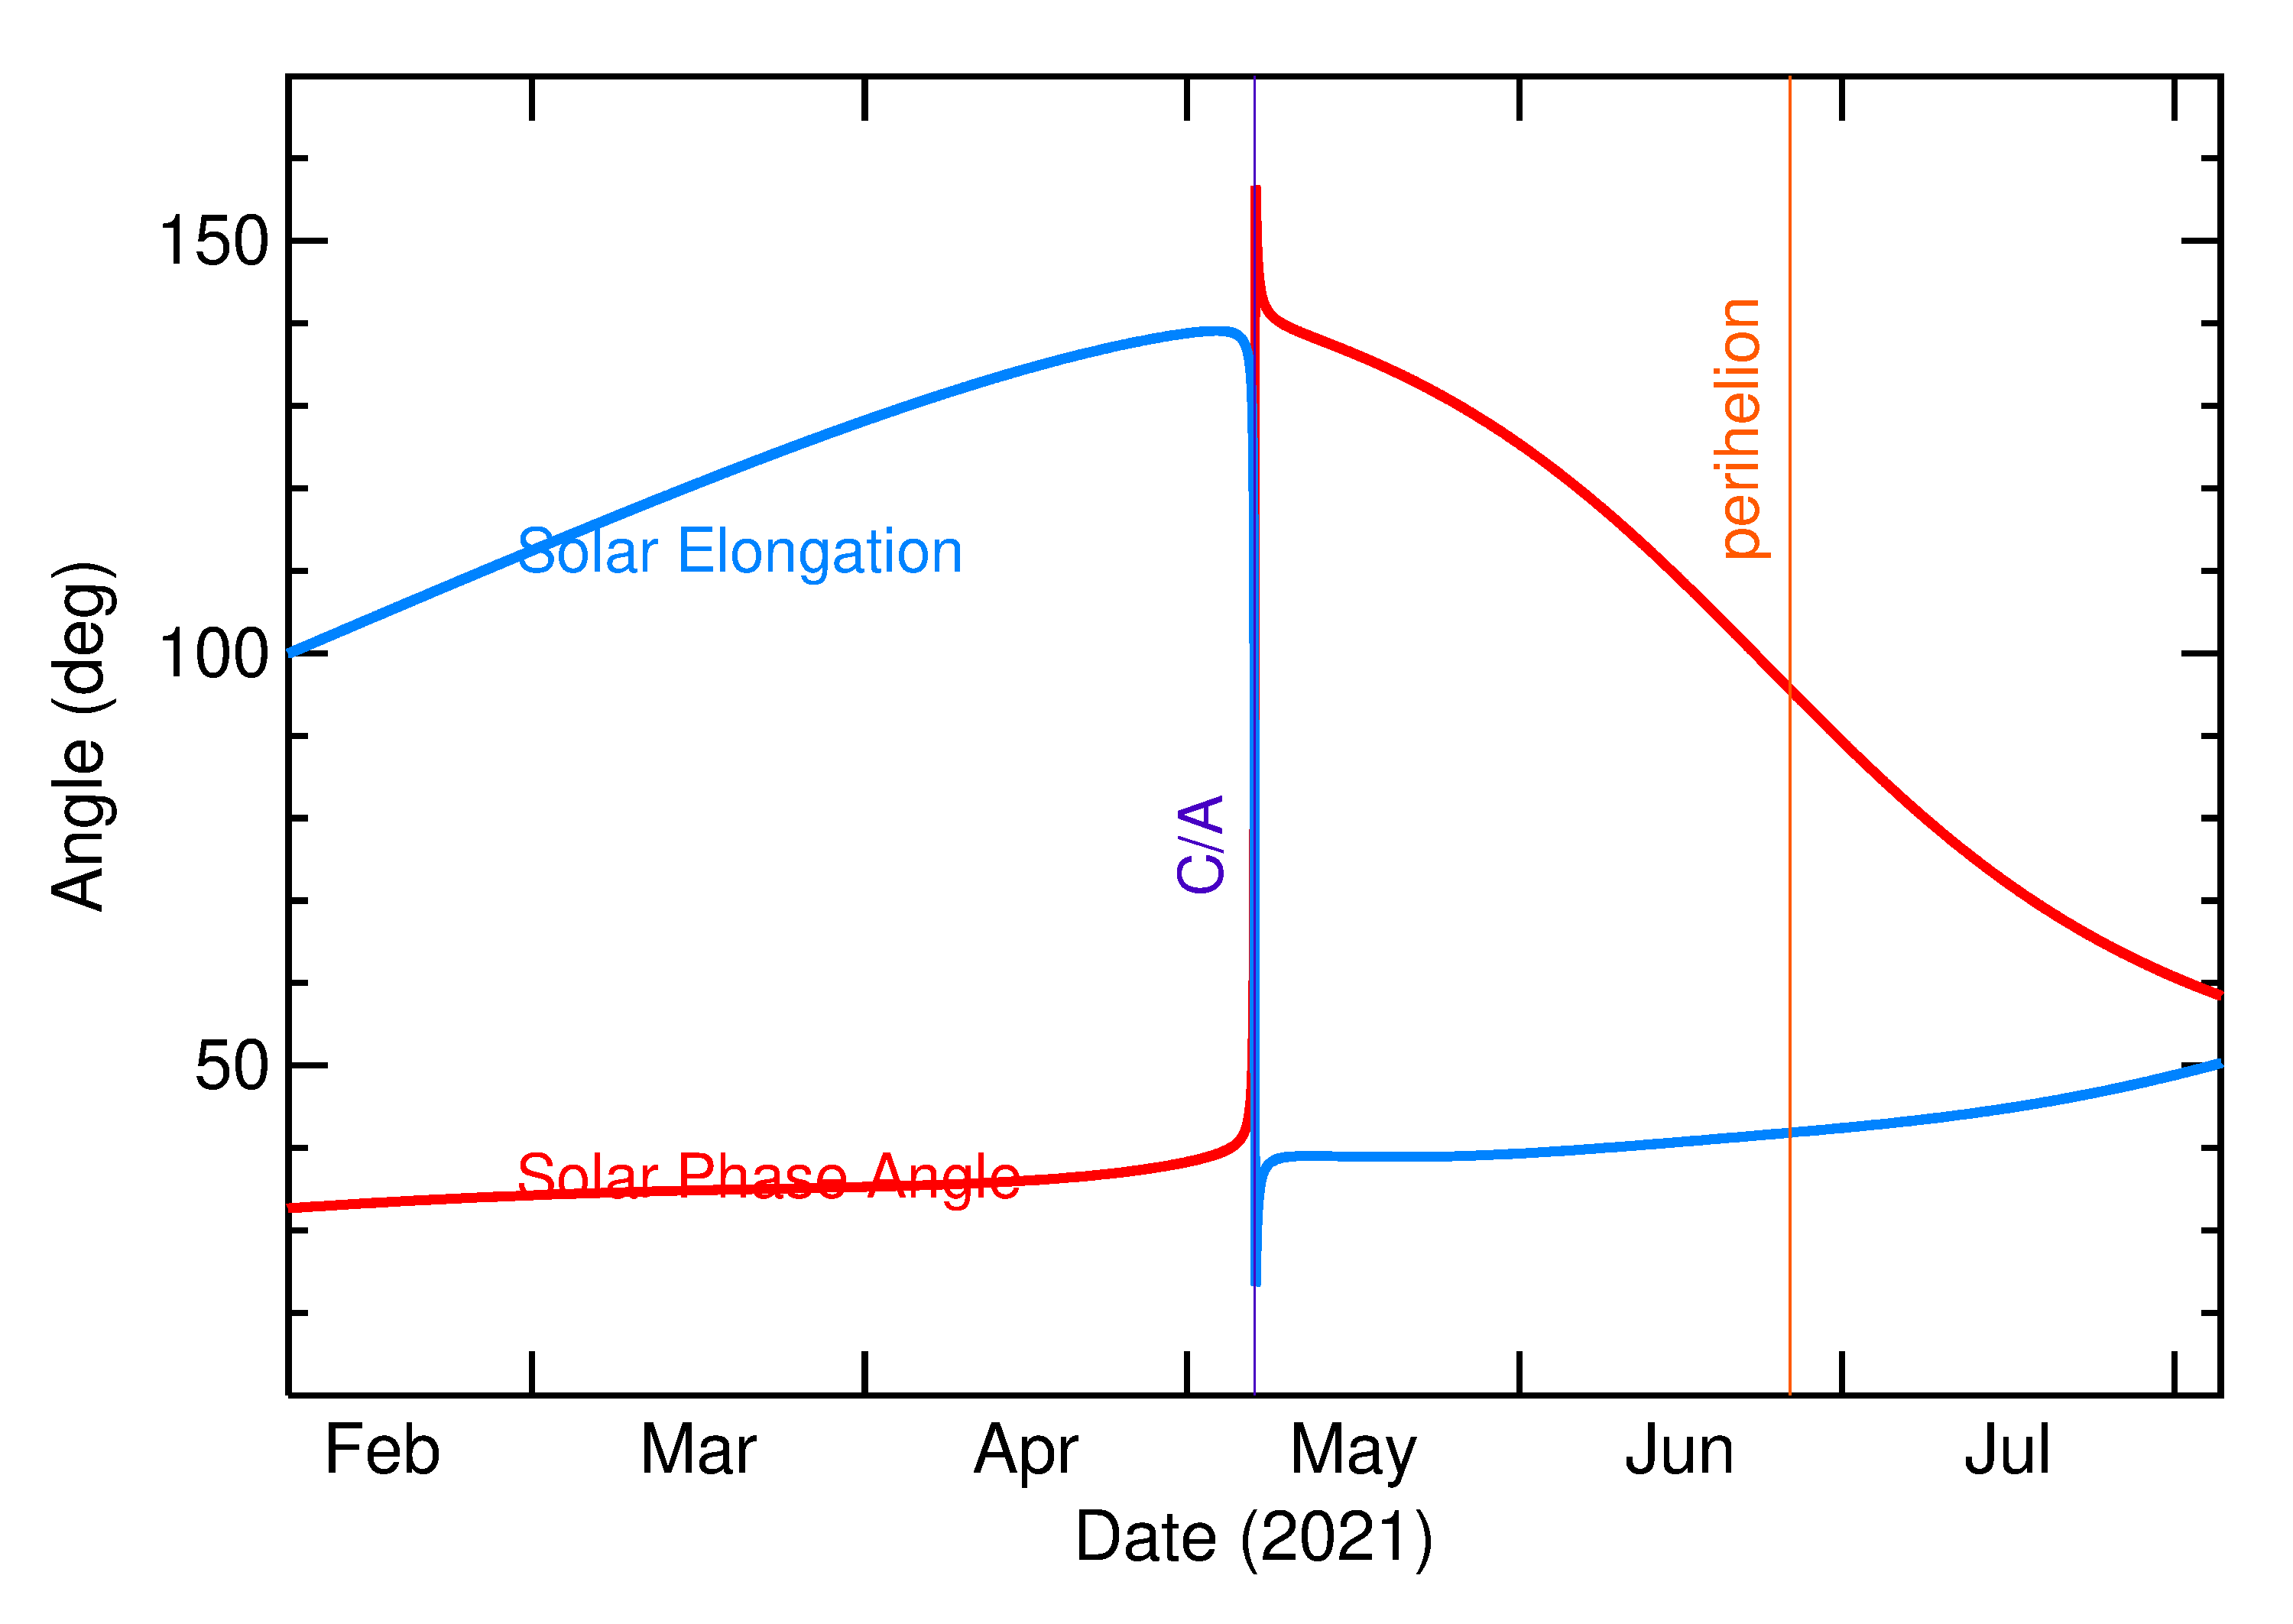 Solar Elongation and Solar Phase Angle of 2021 JS1 in the months around closest approach